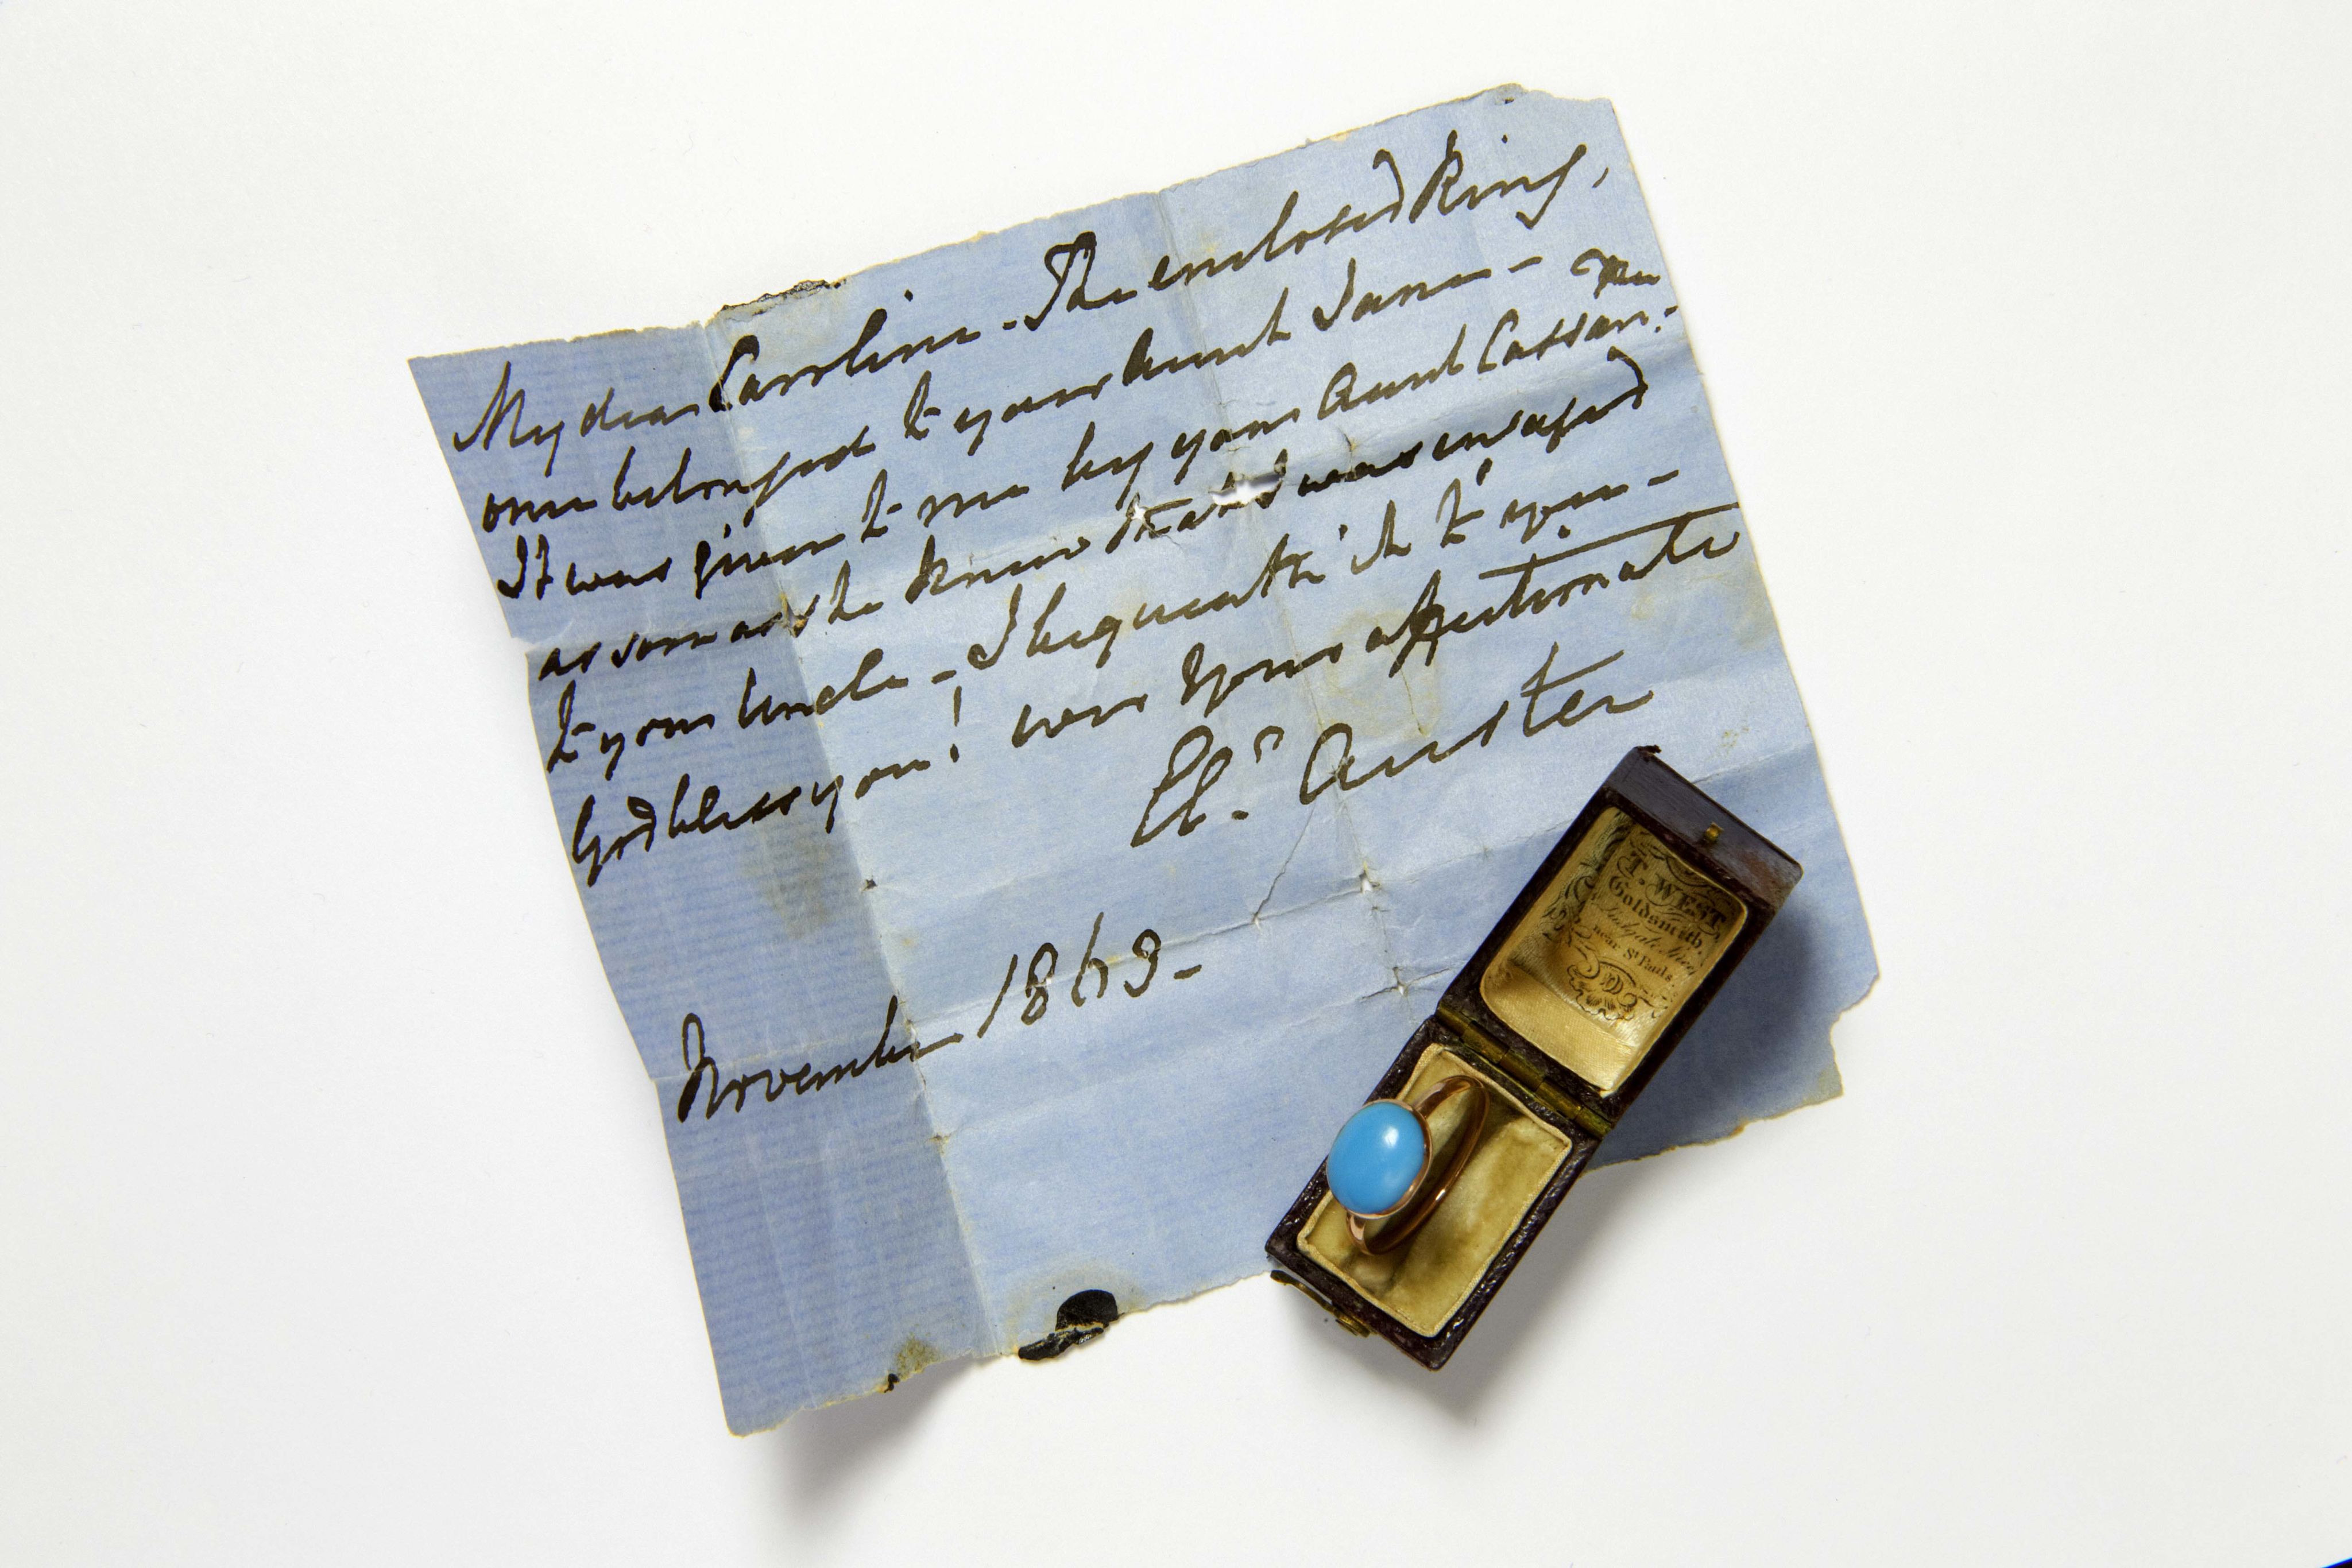 A turquoise ring inside a box on top of a letter.